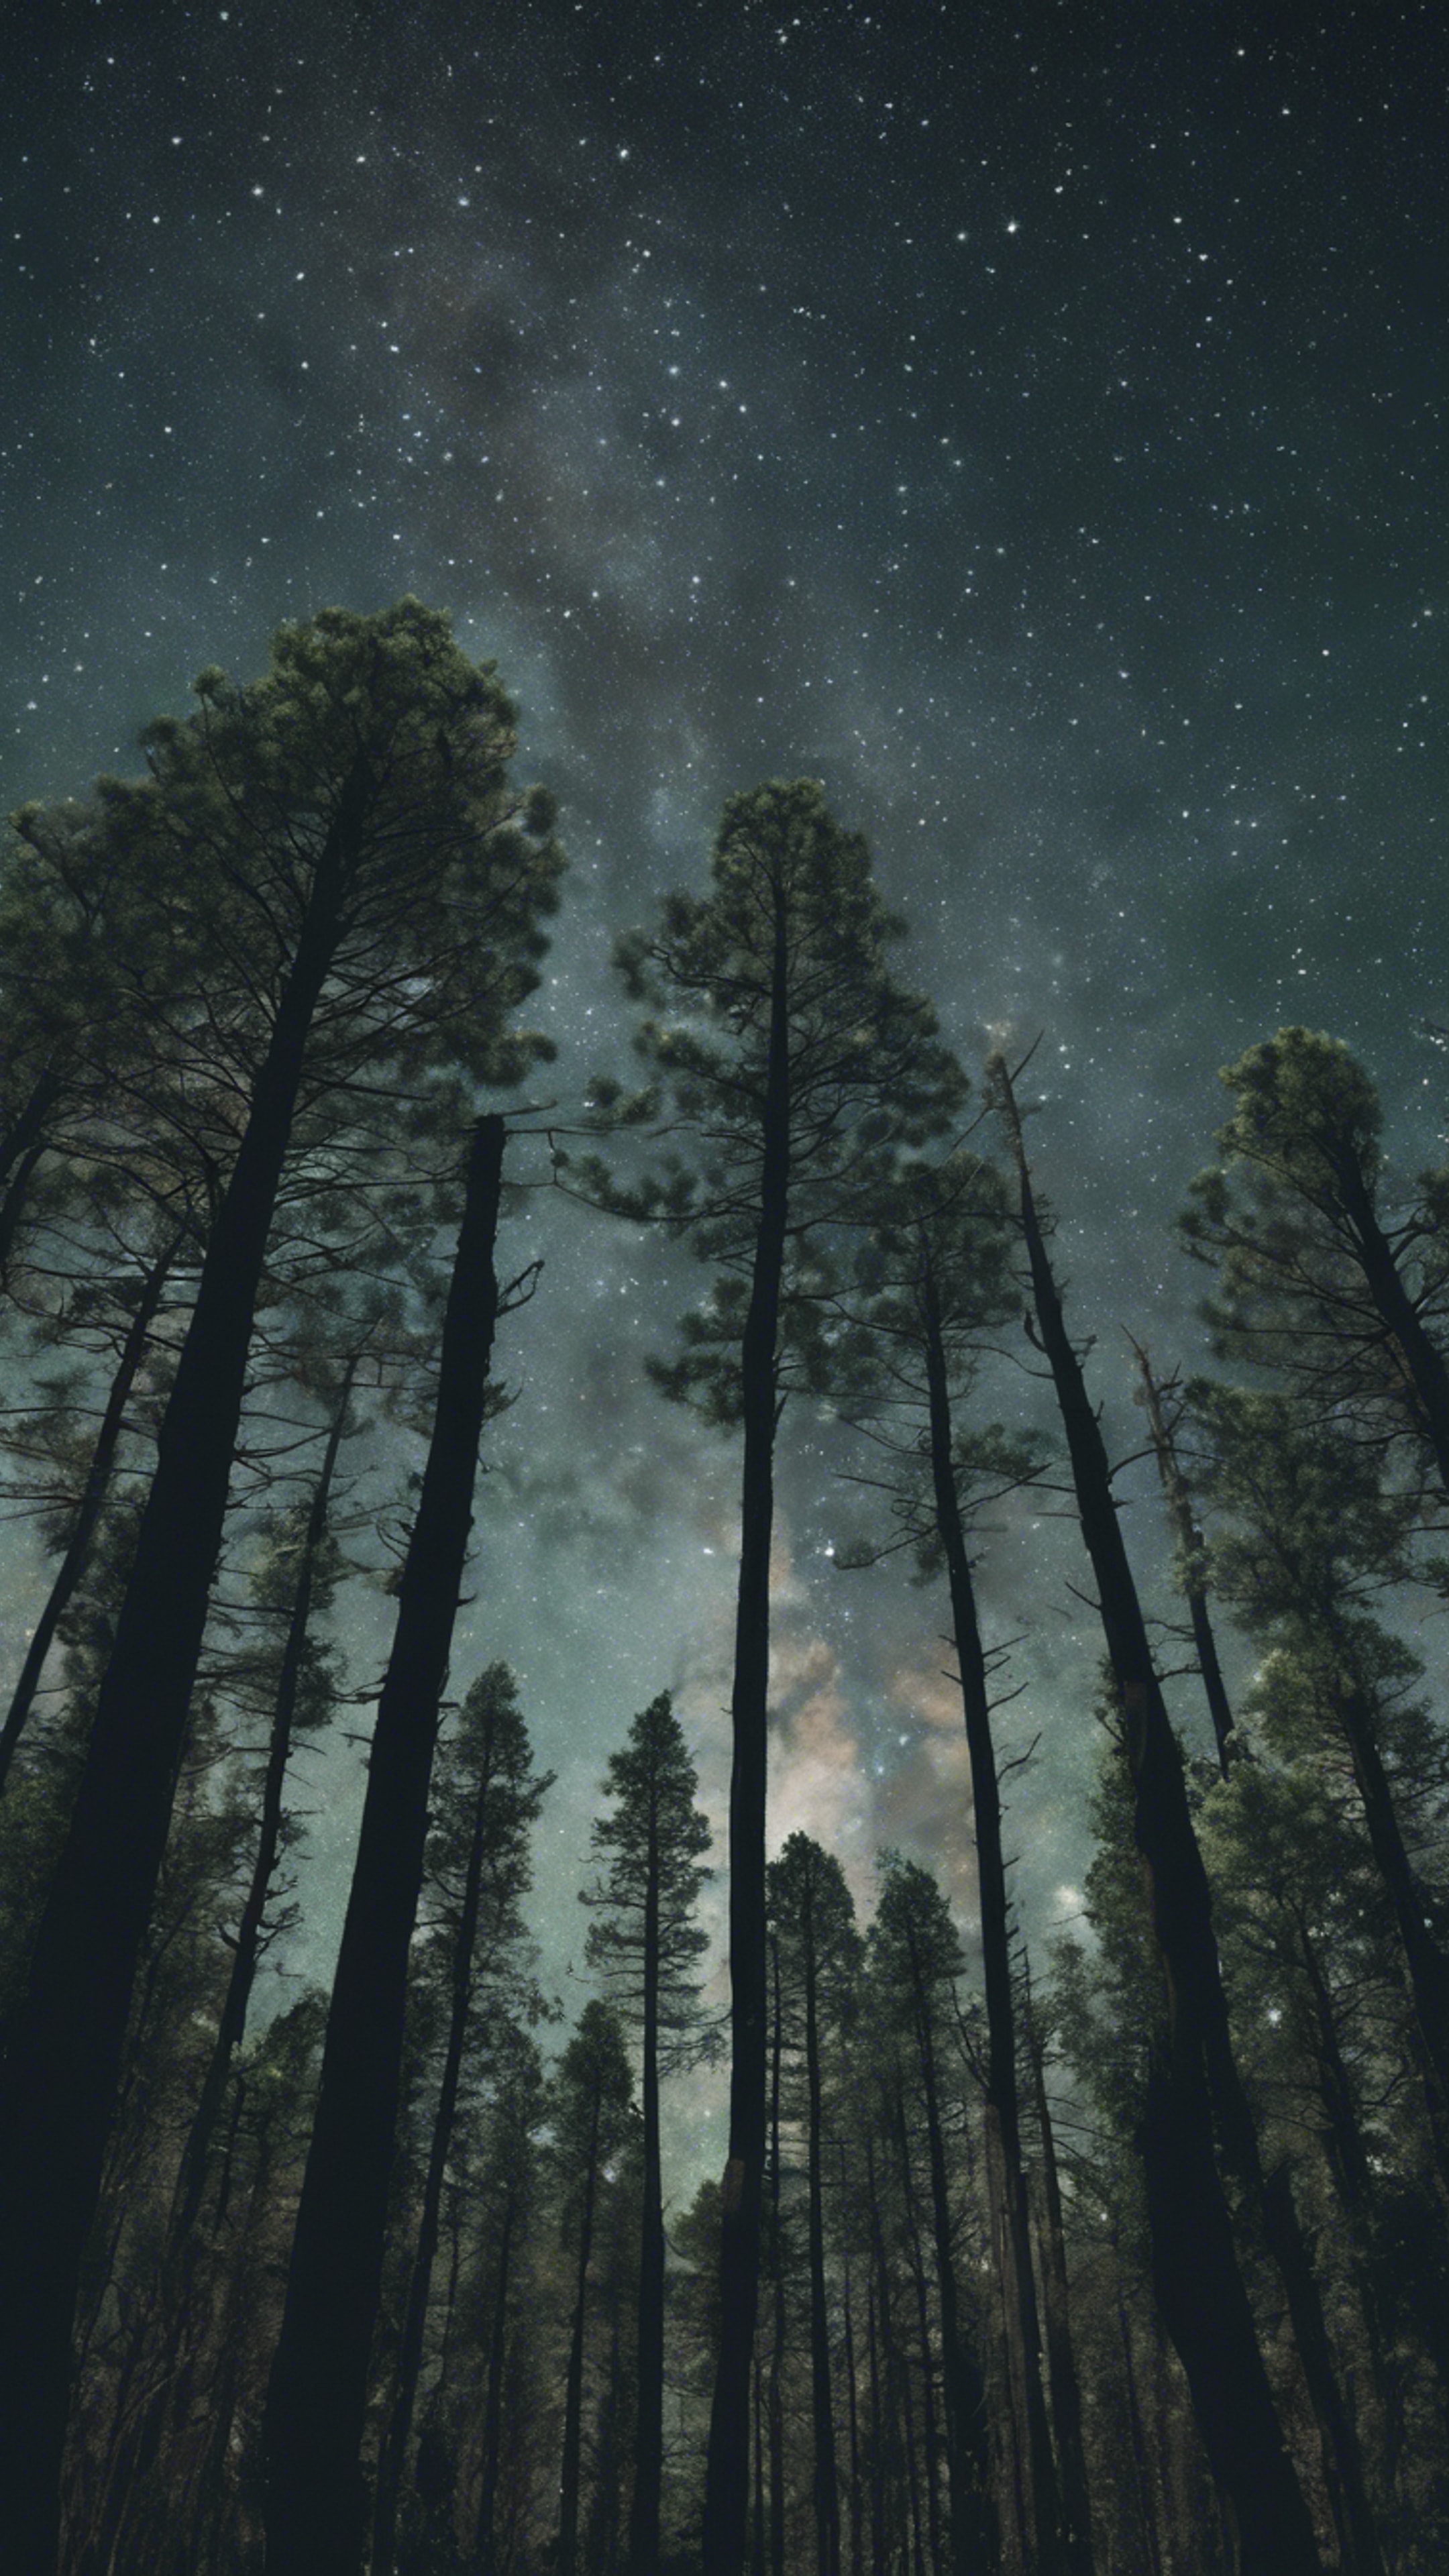 A wilderness scene with tall, dark green pine trees occluding the stars. Валлпапер[a450718e497a48169b60]